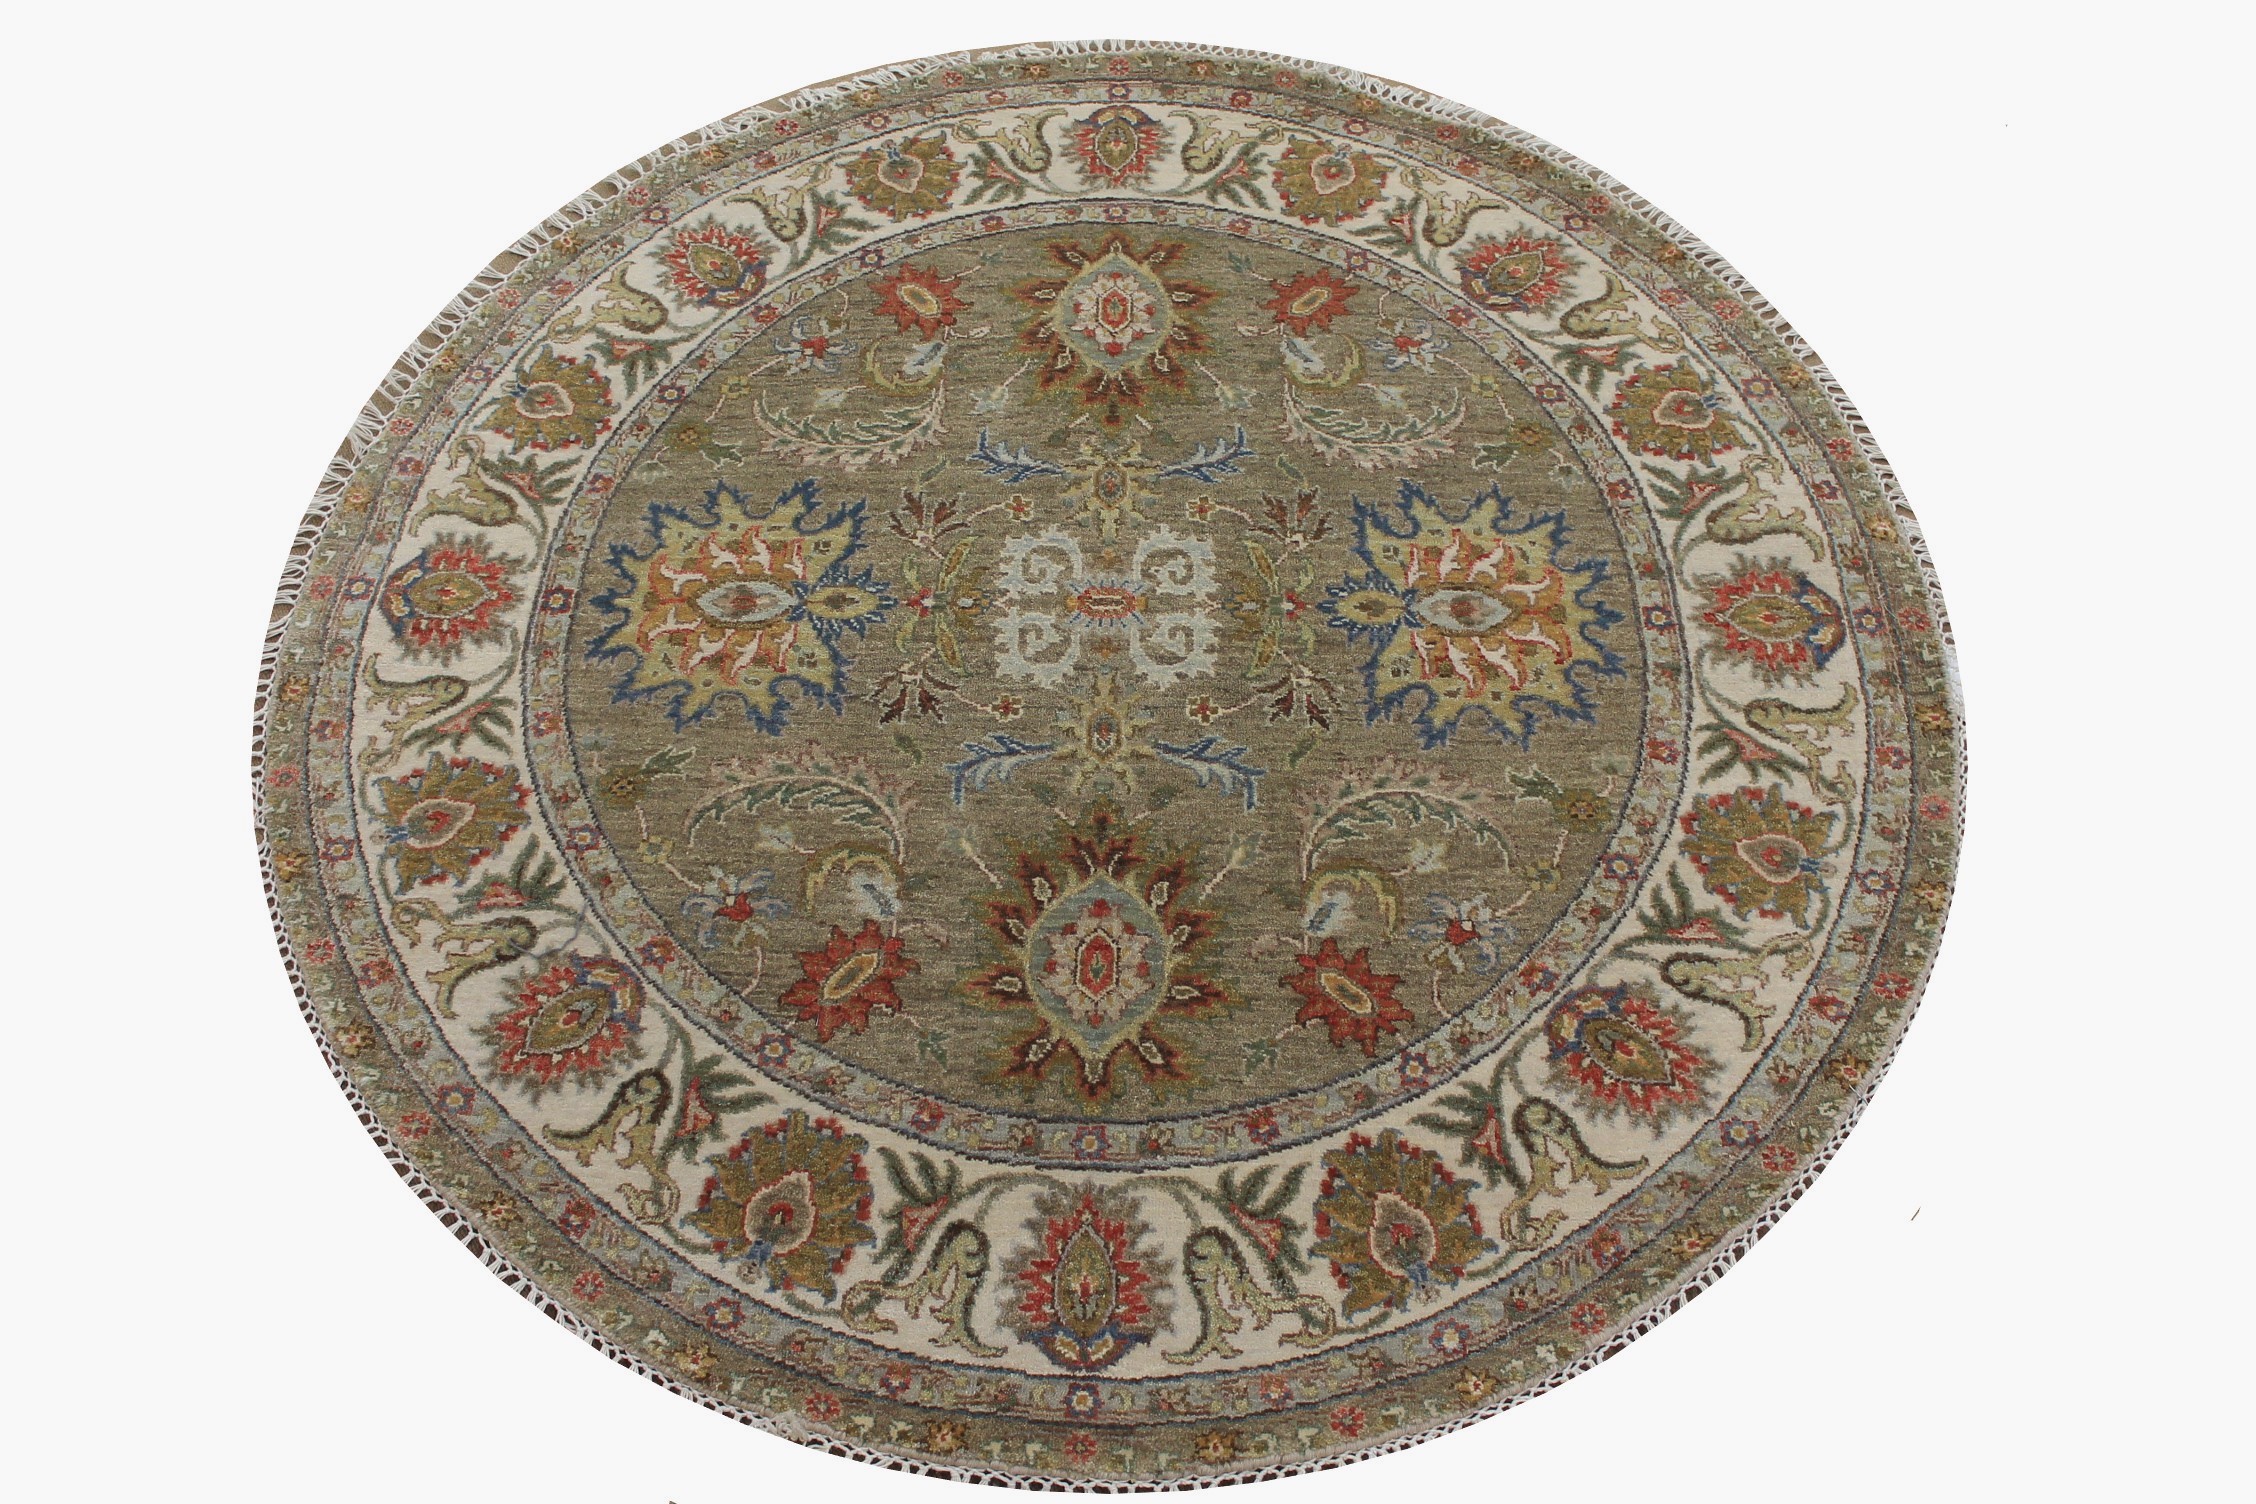 5 ft. Round & Square Traditional Hand Knotted Wool Area Rug - MR025055